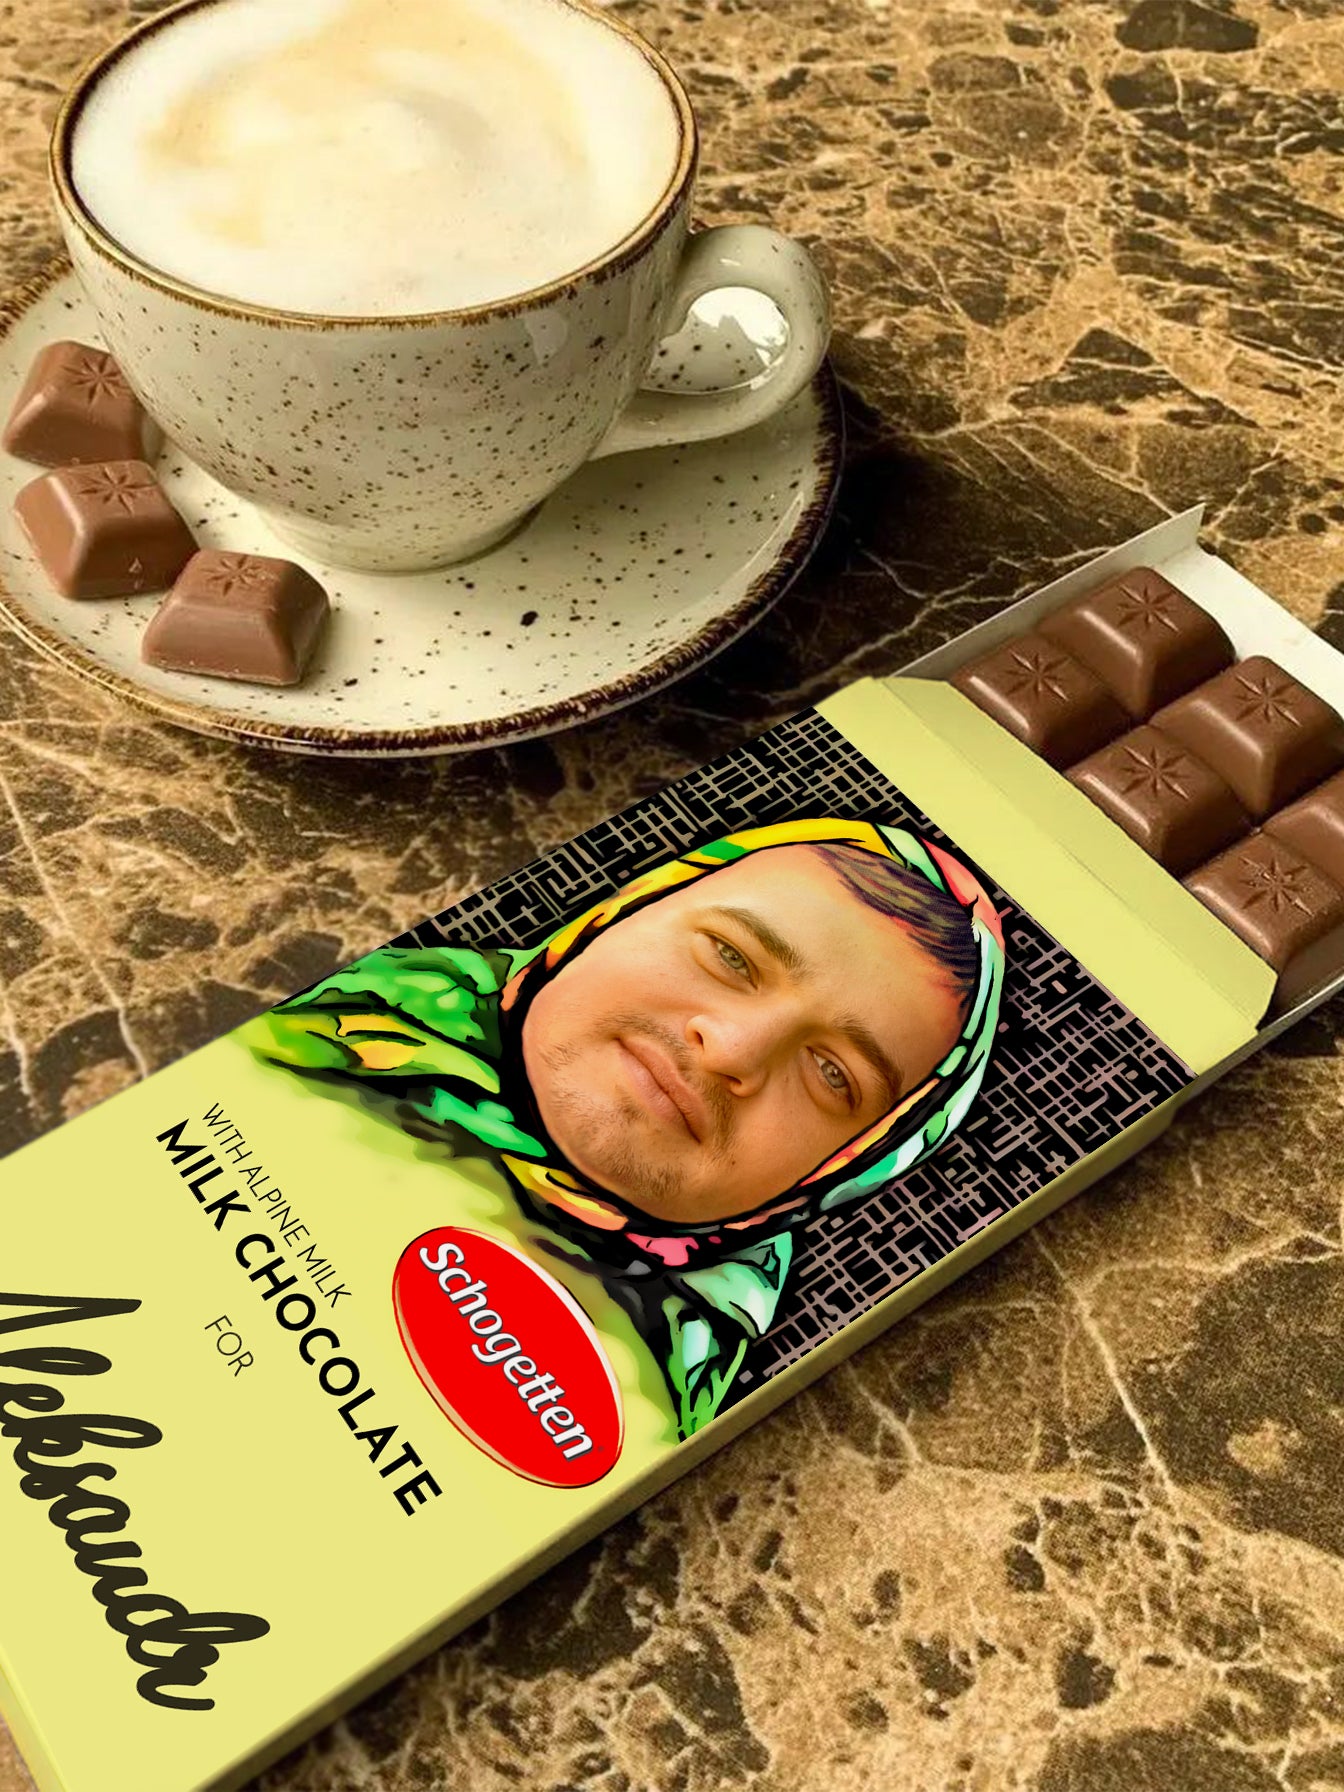 Personalised "Alionka" Chocolate Bar With Your Face